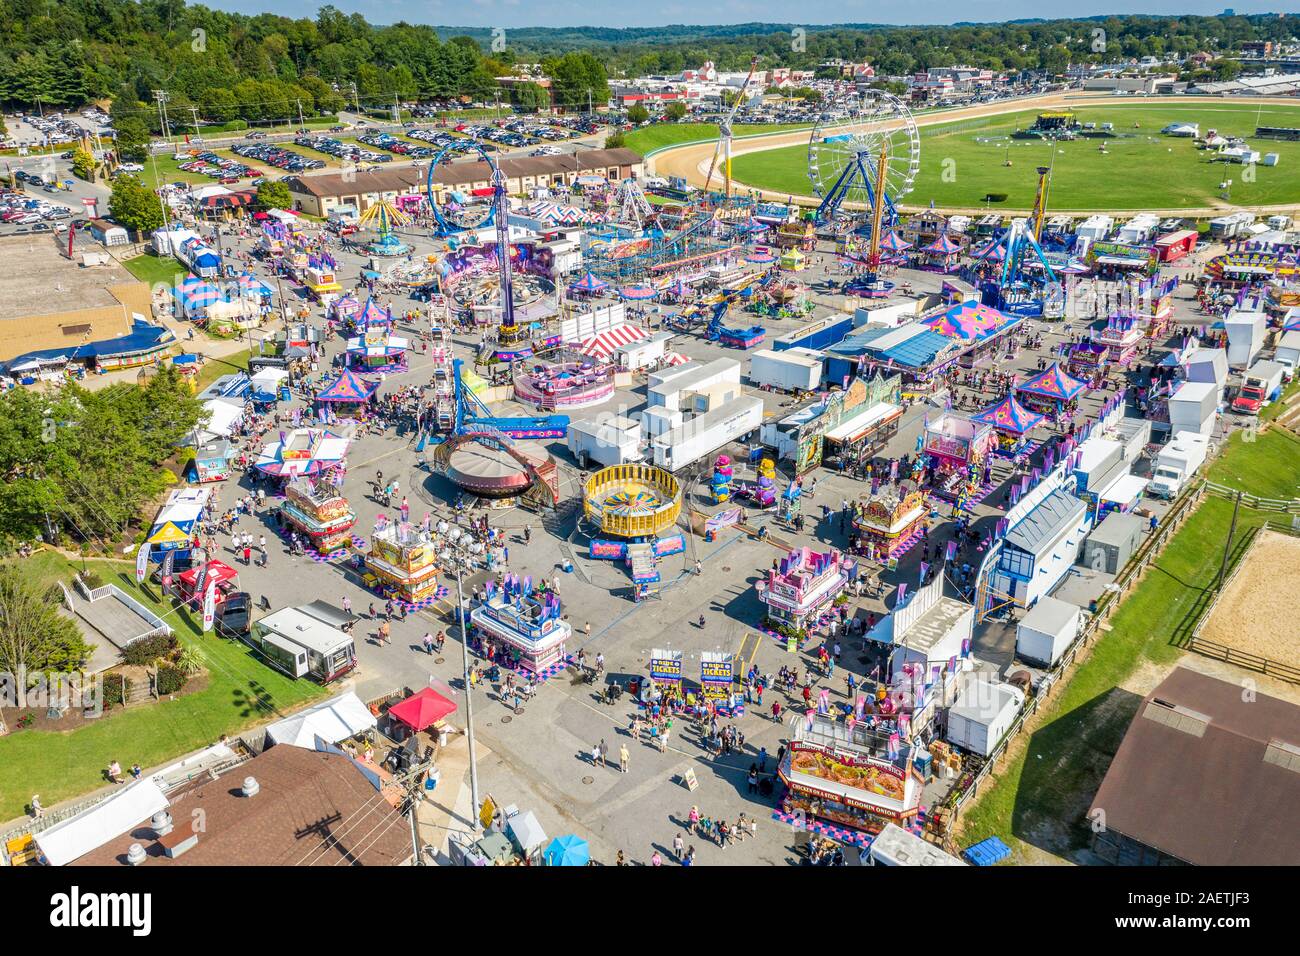 An overhead view of the rides and attractions at the state fair